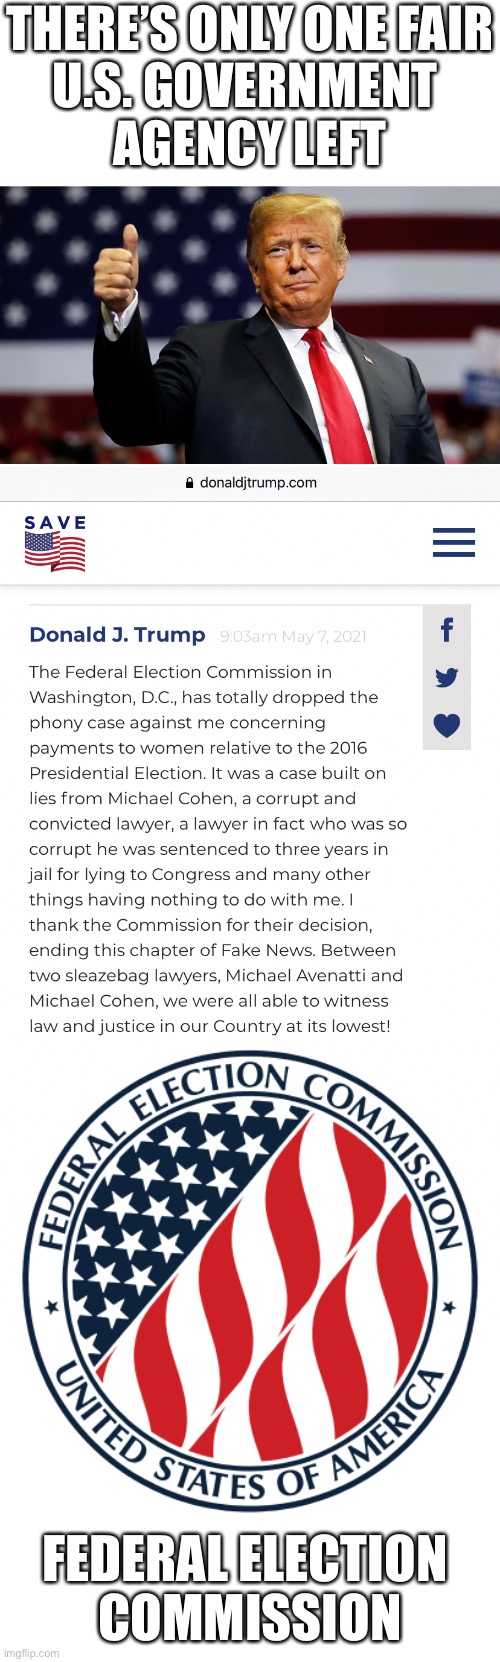 The Federal Election Commission—the last fair U.S. government agency! |  THERE’S ONLY ONE FAIR
U.S. GOVERNMENT 
AGENCY LEFT; FEDERAL ELECTION 
COMMISSION | image tagged in president trump,donald trump,trump,us government,fairness | made w/ Imgflip meme maker